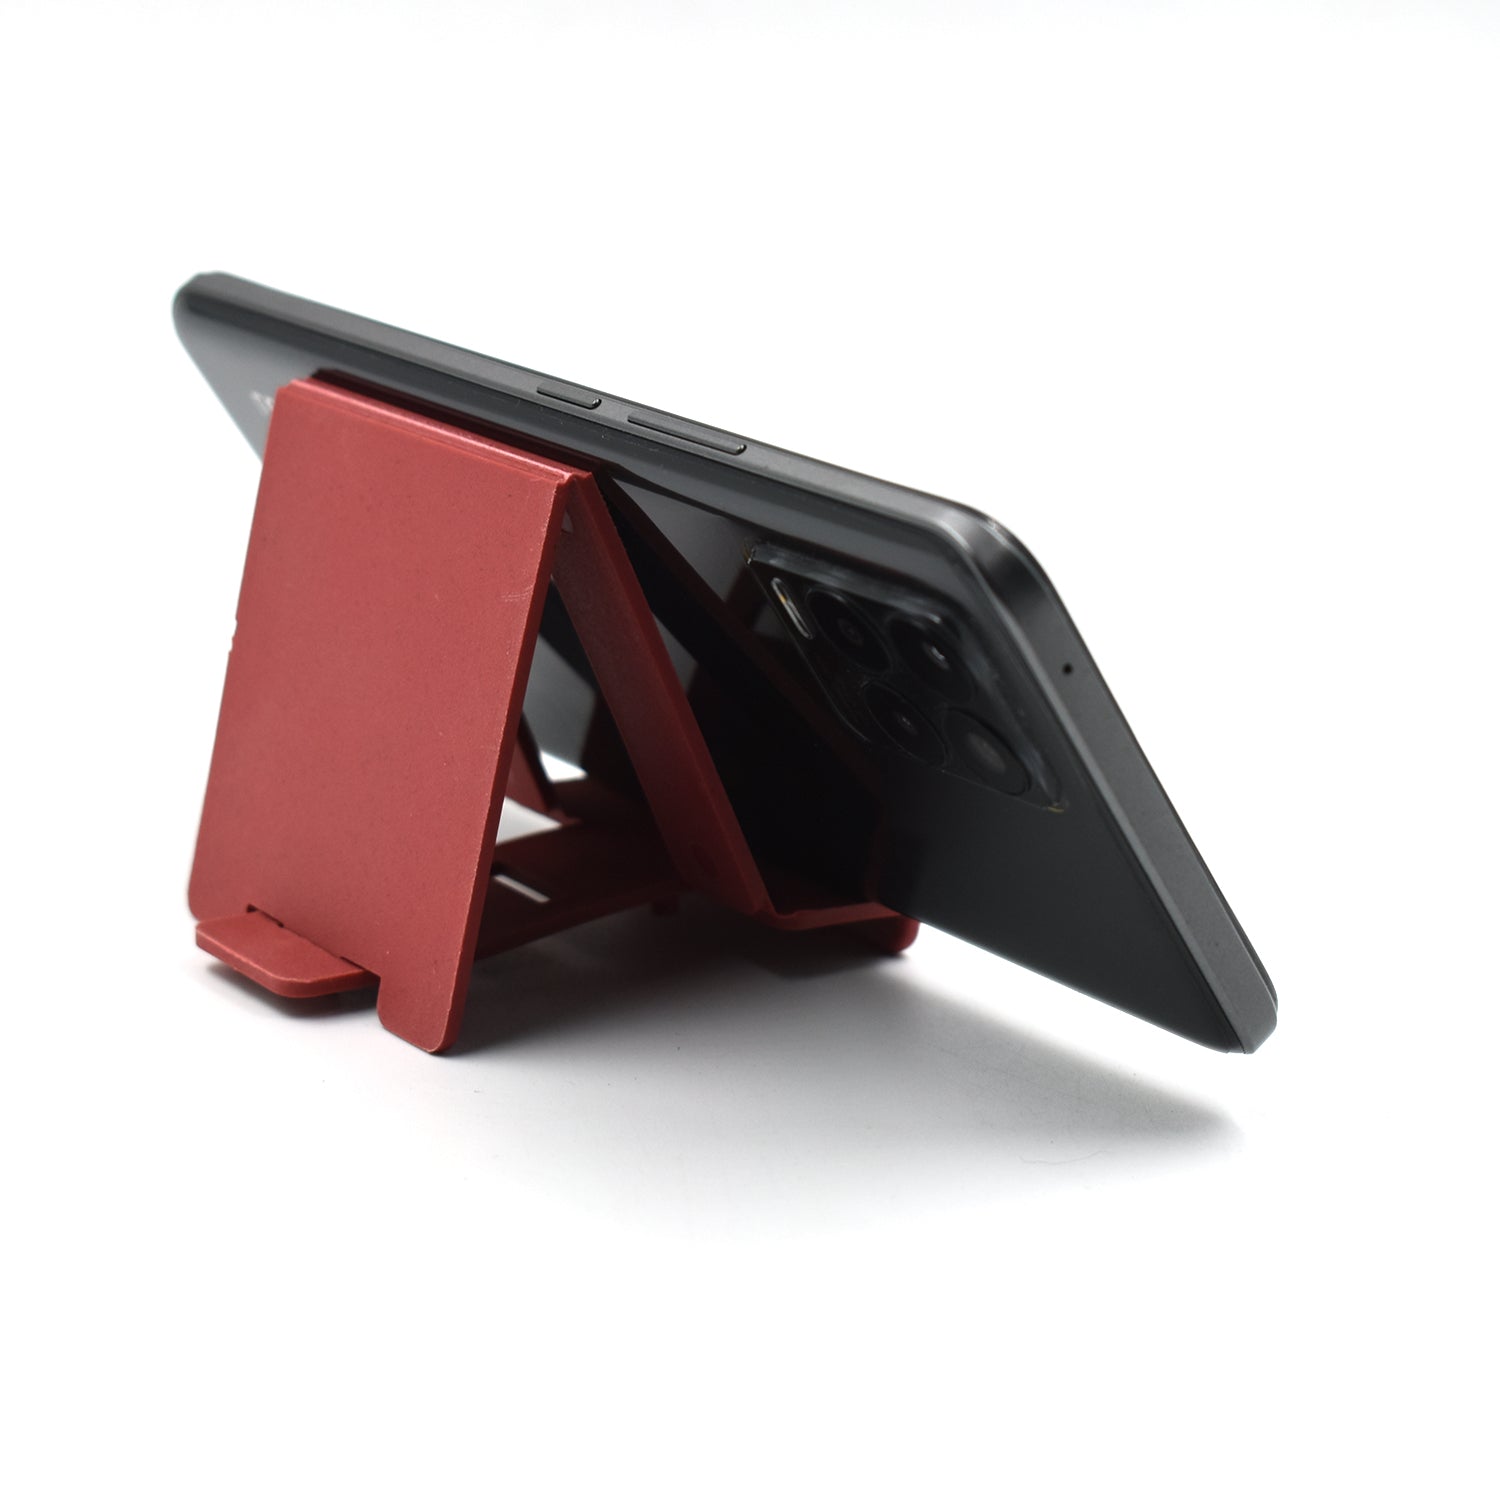 4793 10 Pc Adjustable Mobile Stand used in all kinds of places including household and offices as a mobile supporting stand.